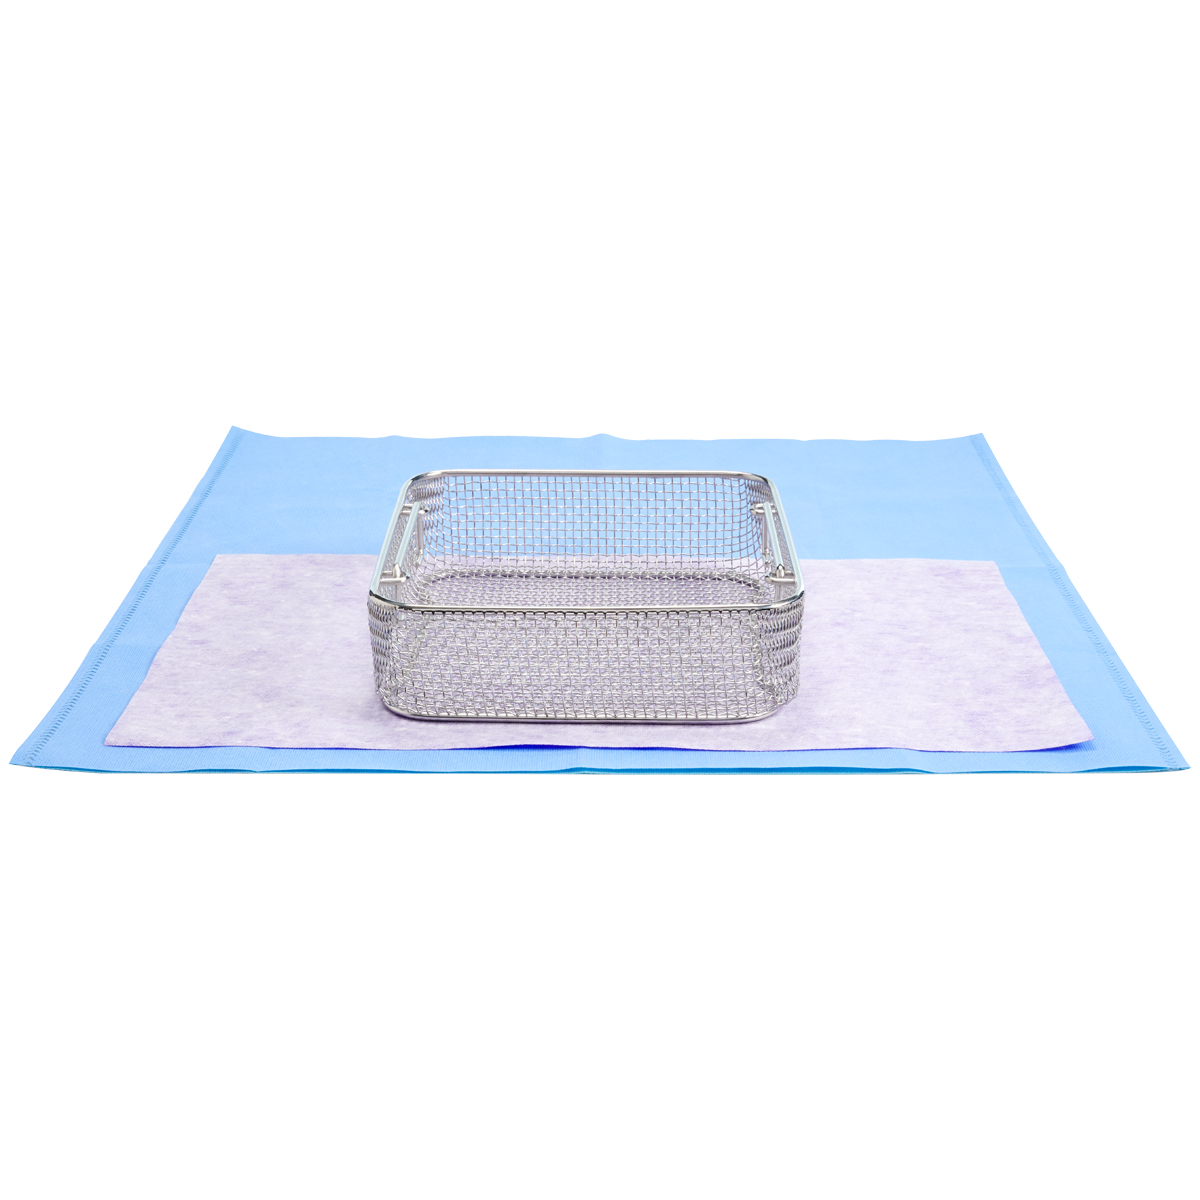 Tray Mat (wet pack prevention) Image